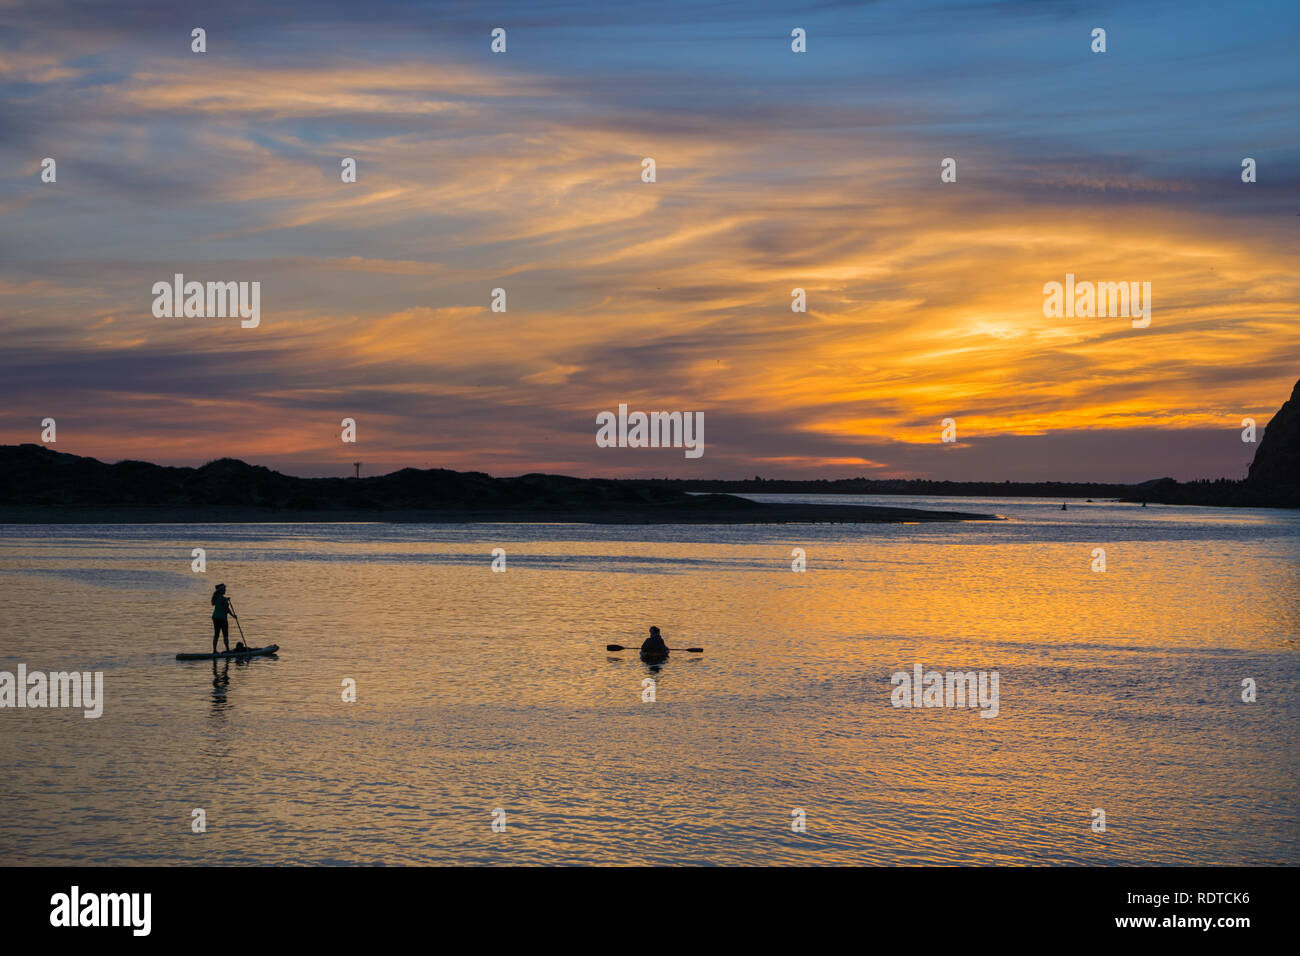 Colorful sunset as seen from the Morro Bay harbor; silhouettes of people enjoying the view from the kayak and paddle board; California Stock Photo